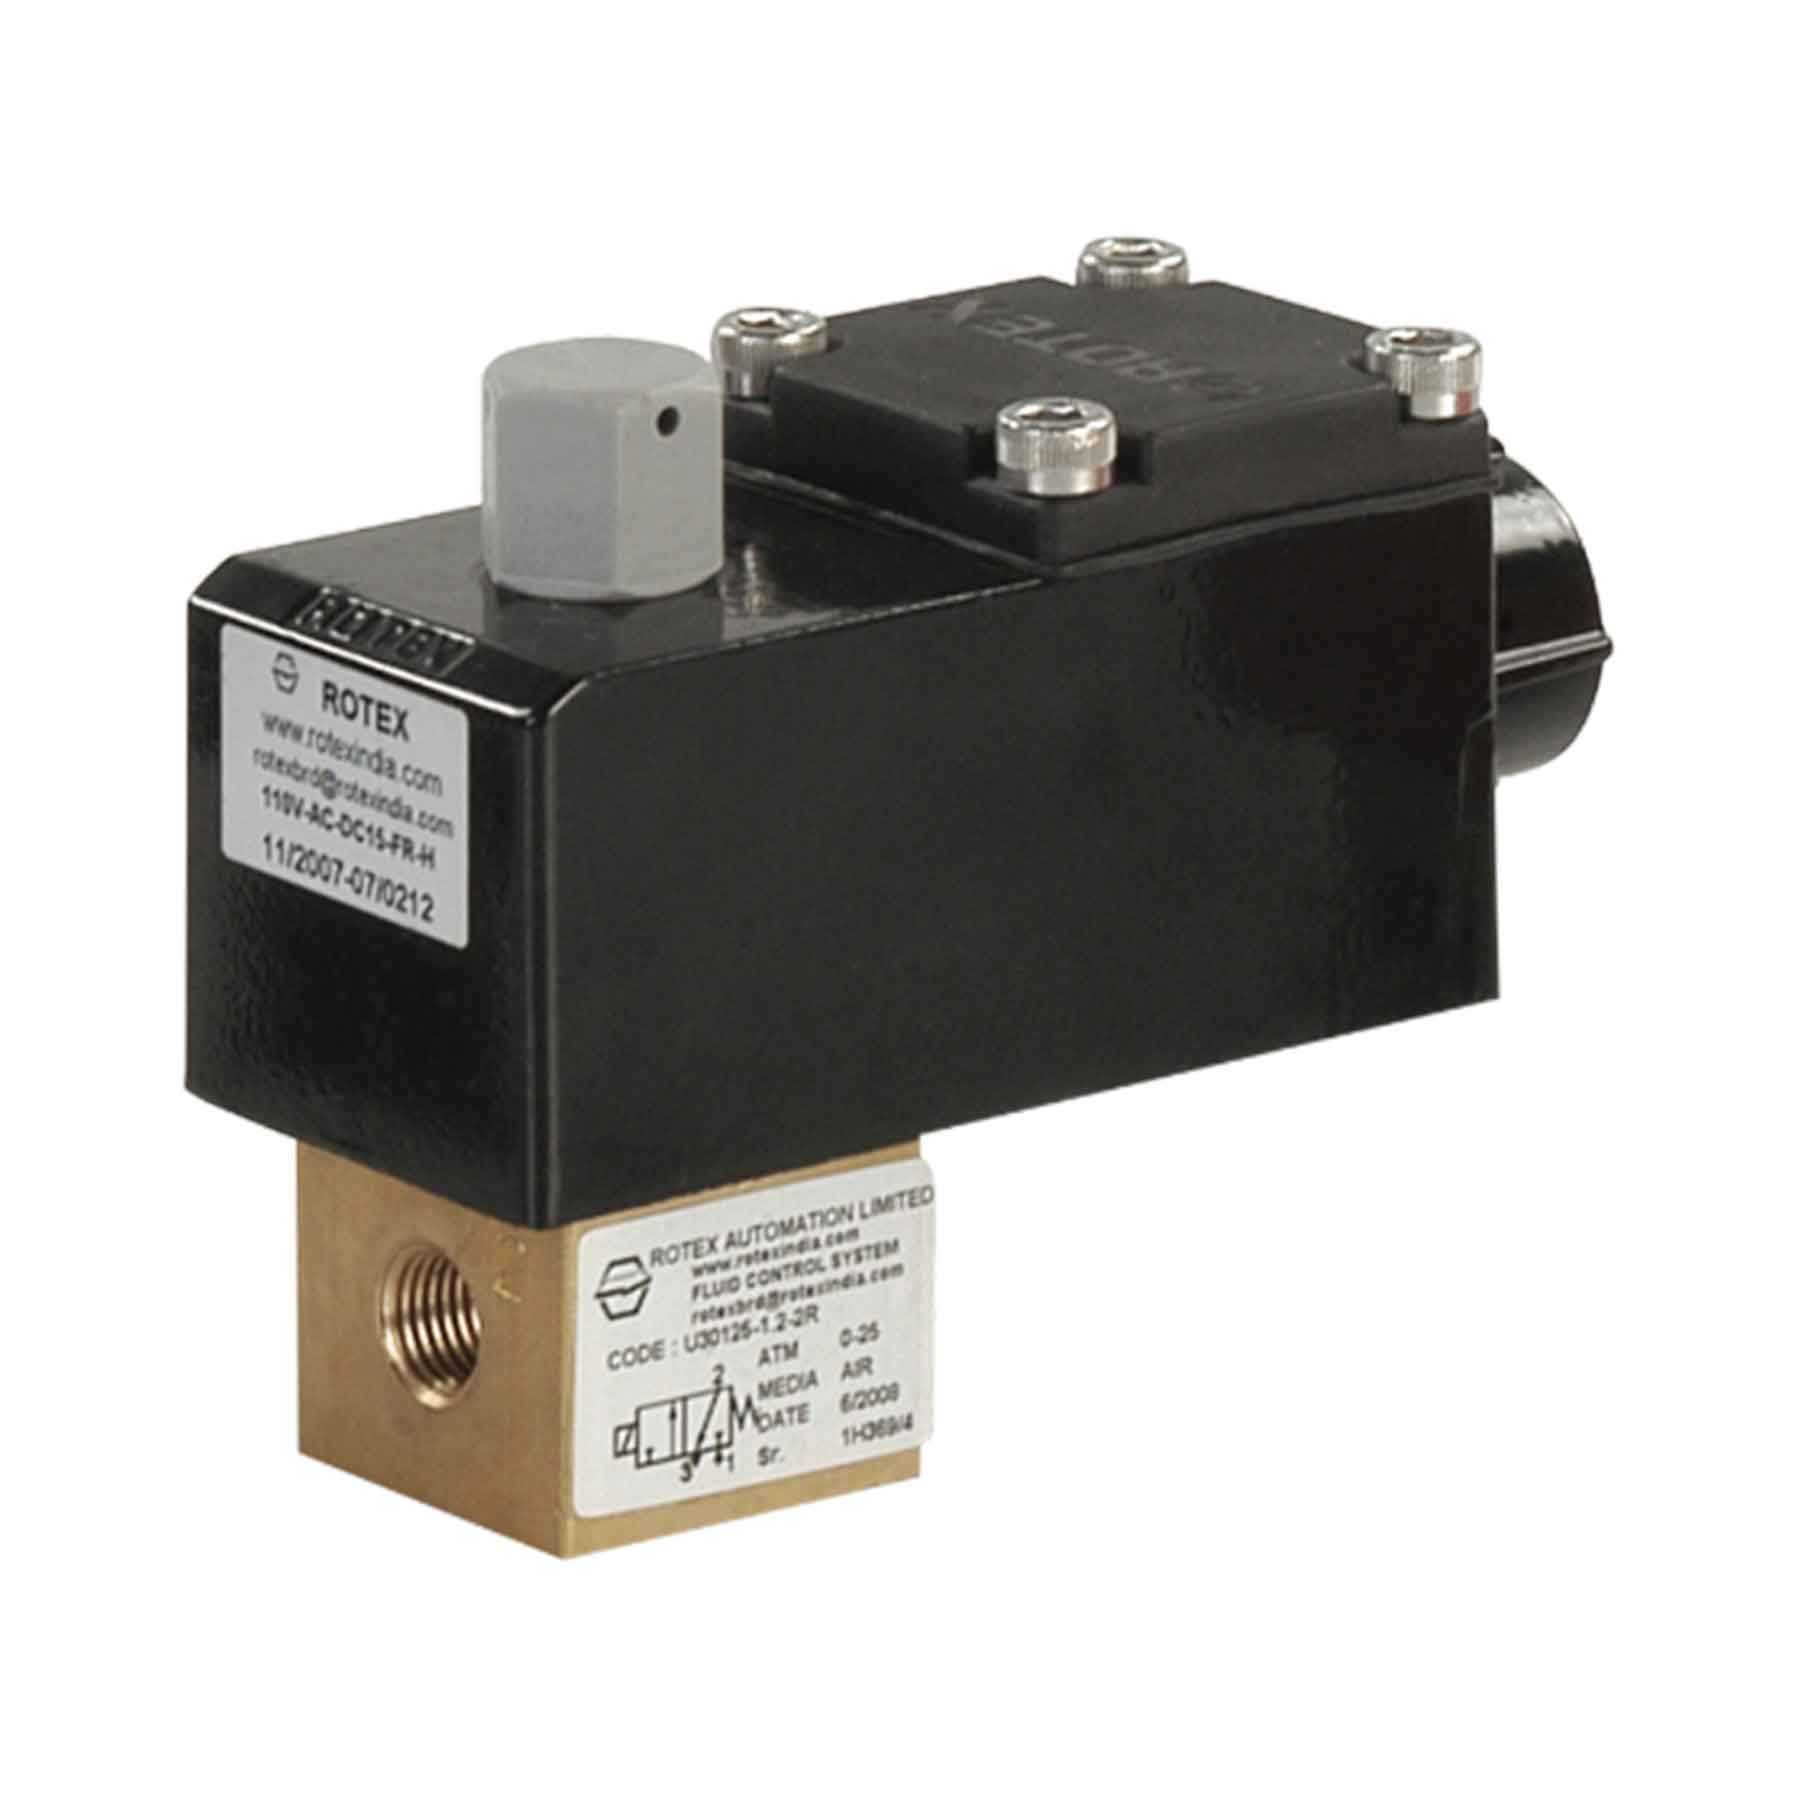 Rotex 2/2-Way Normally Closed Direct Lift Solenoid Valve 20101-3.5-2G-B5-S2+III-230V-AC/DC-16-FR-H-CE